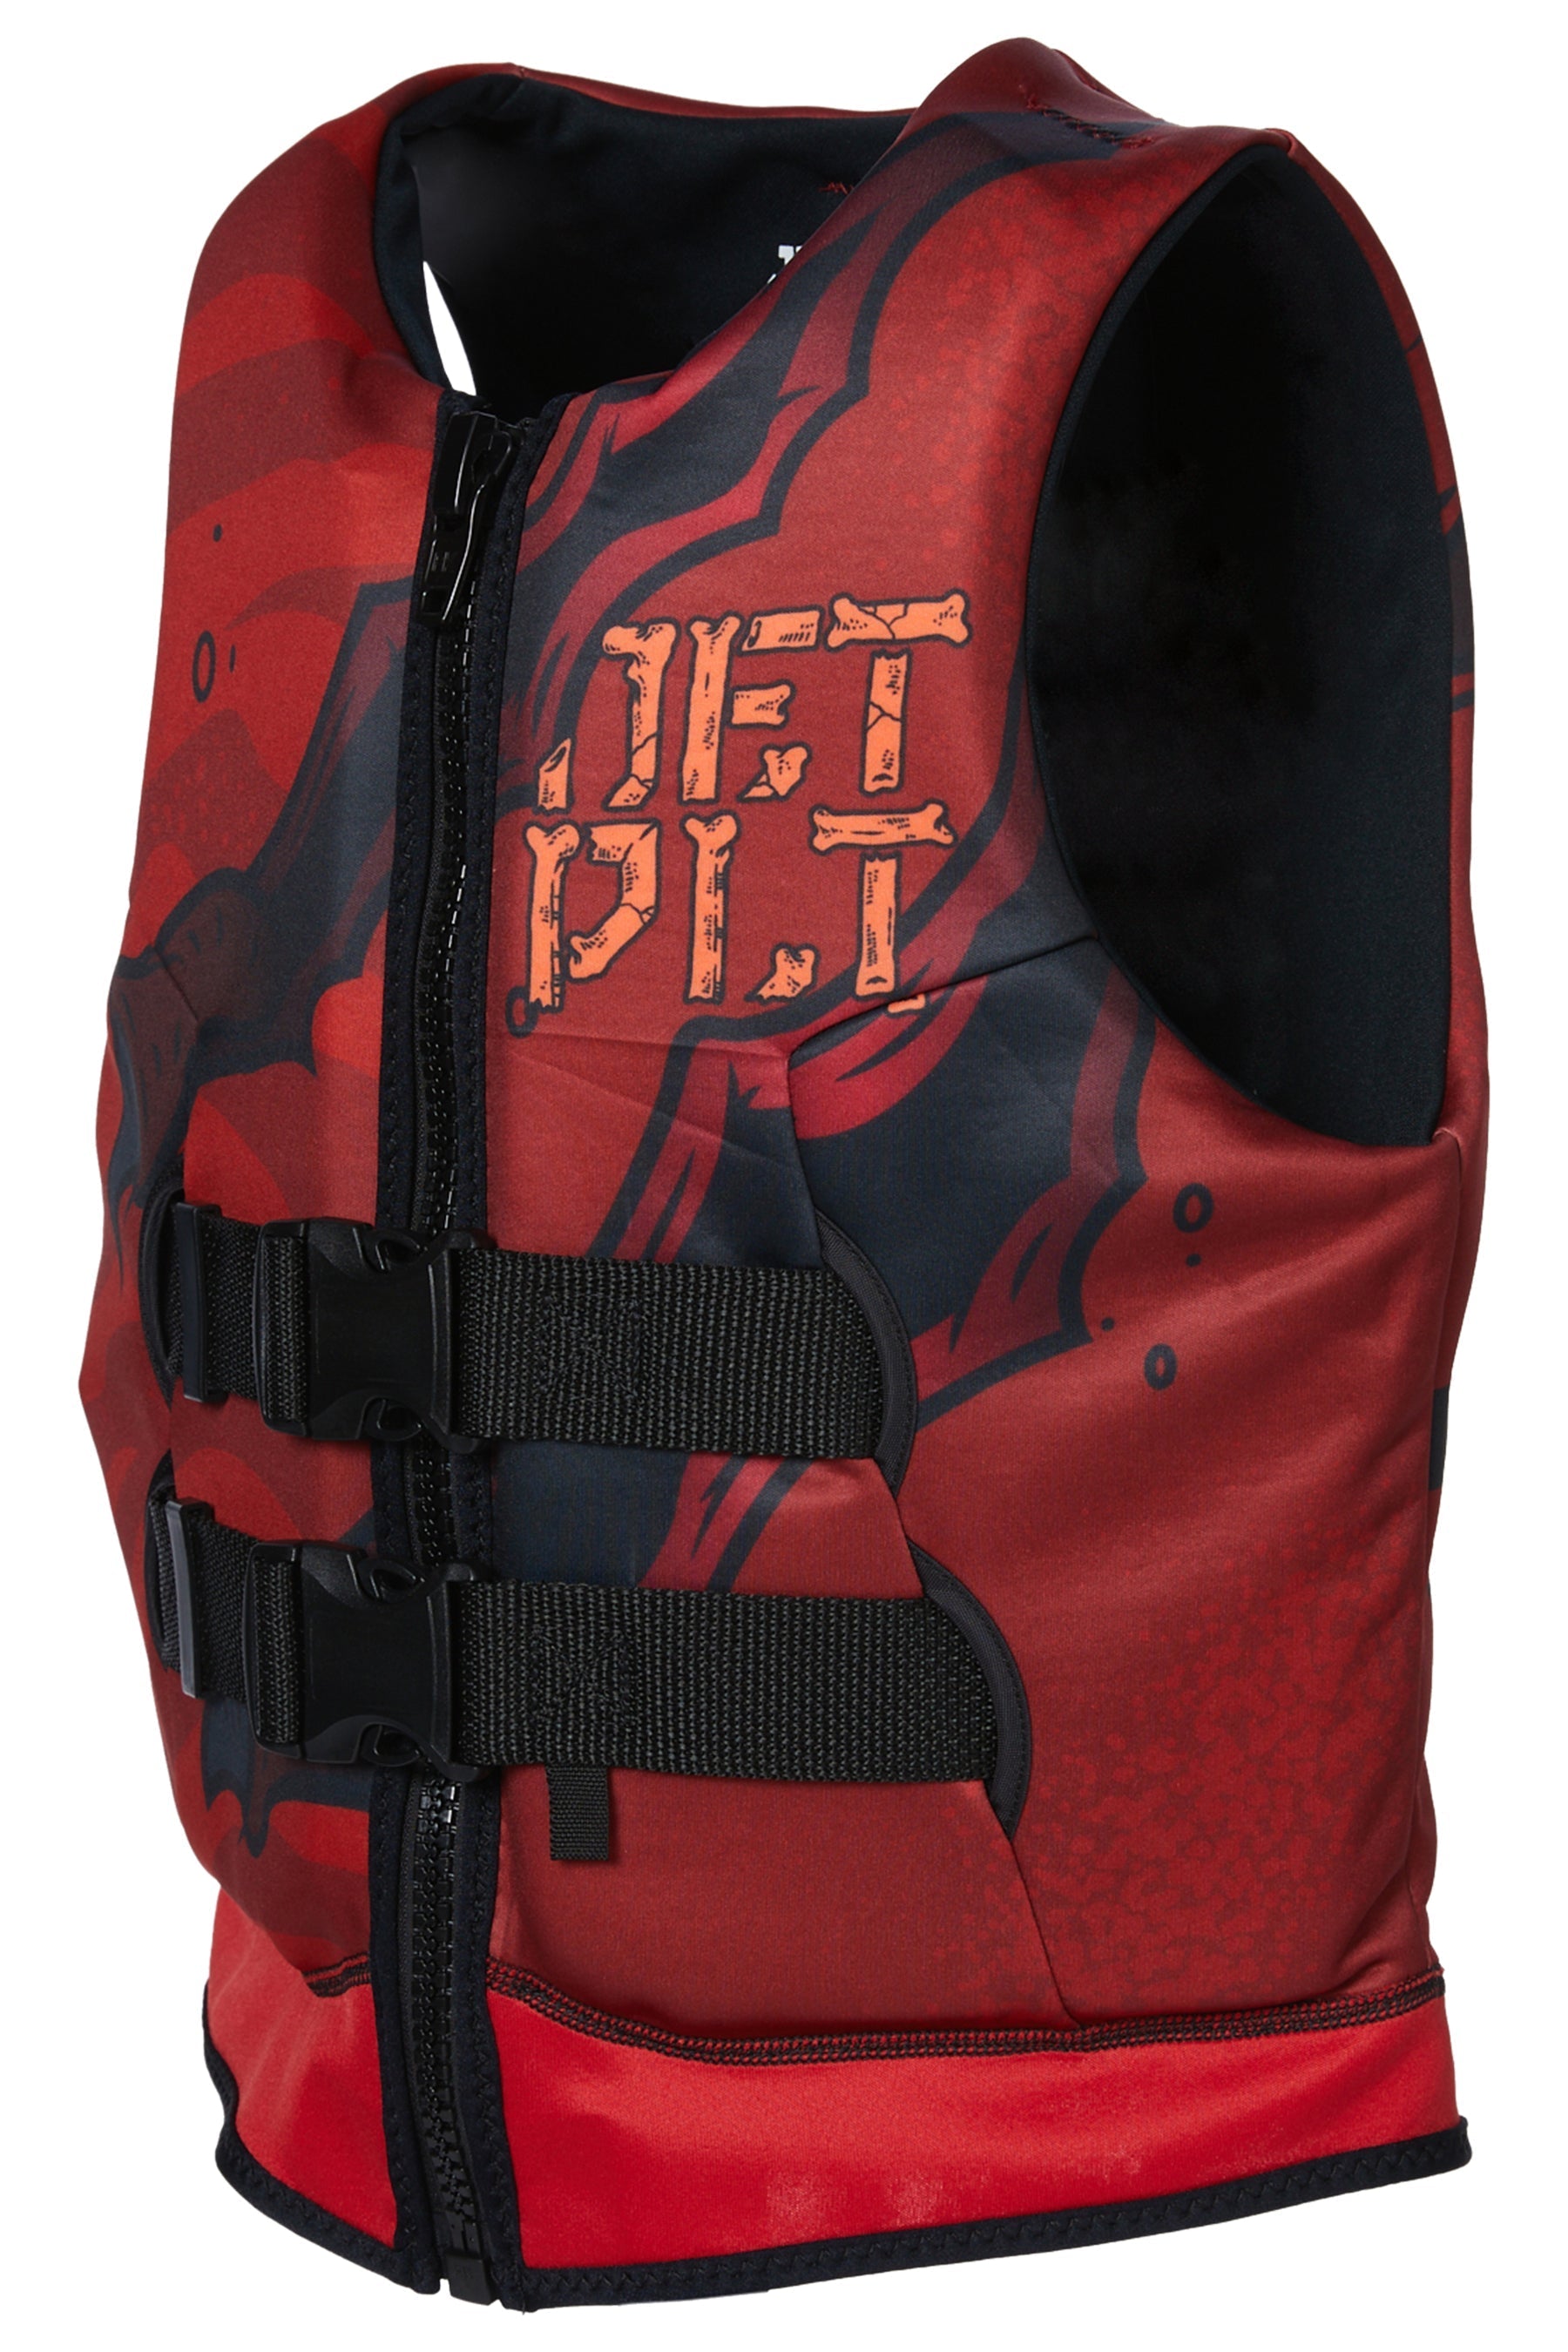 Jetpilot Boys Rex Youth Cause Neo Life Jacket Red 3